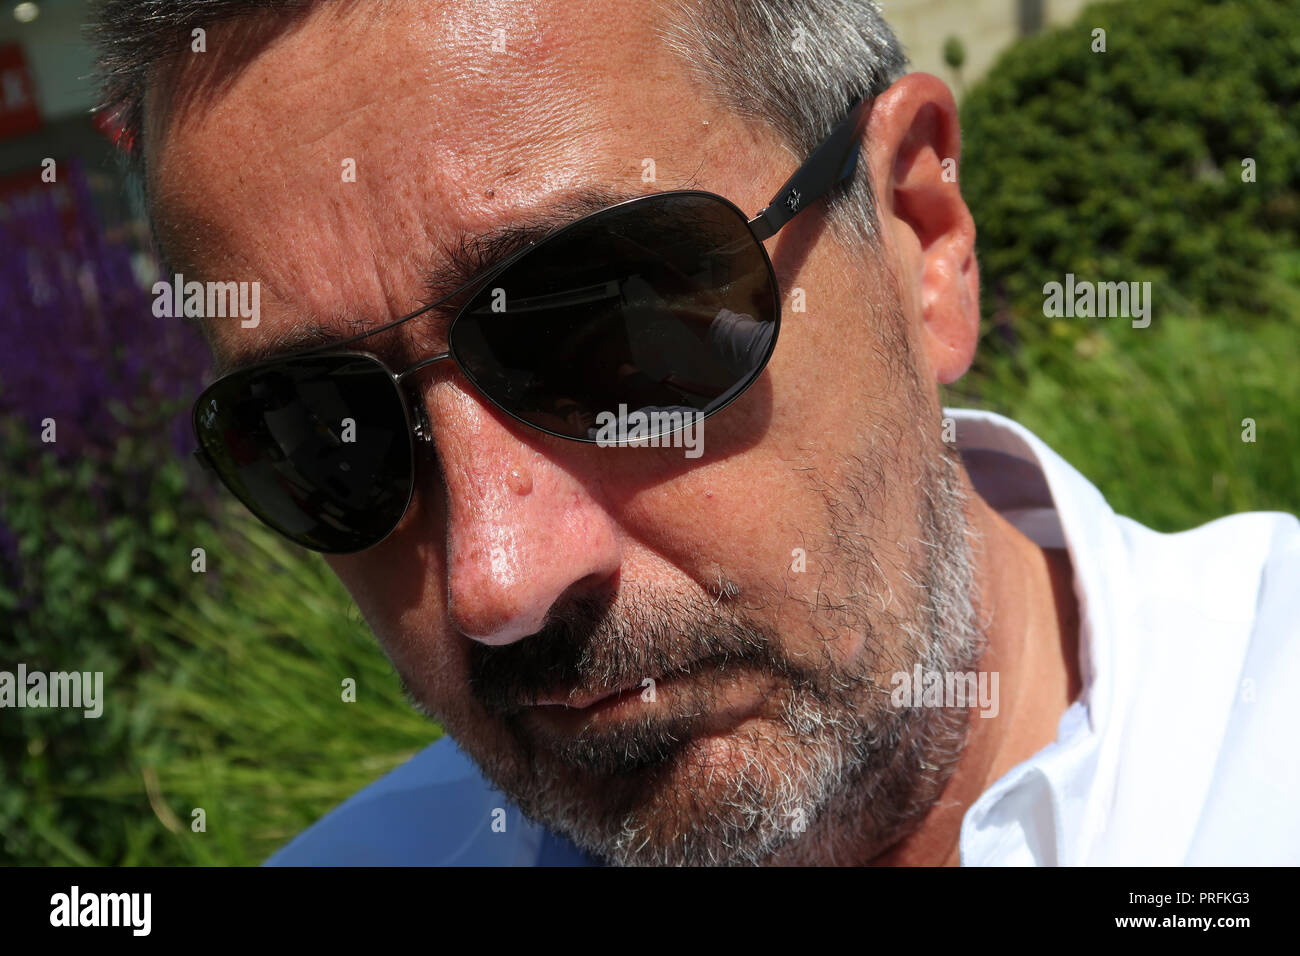 Headshot portrait of tanned middle aged man Stock Photo